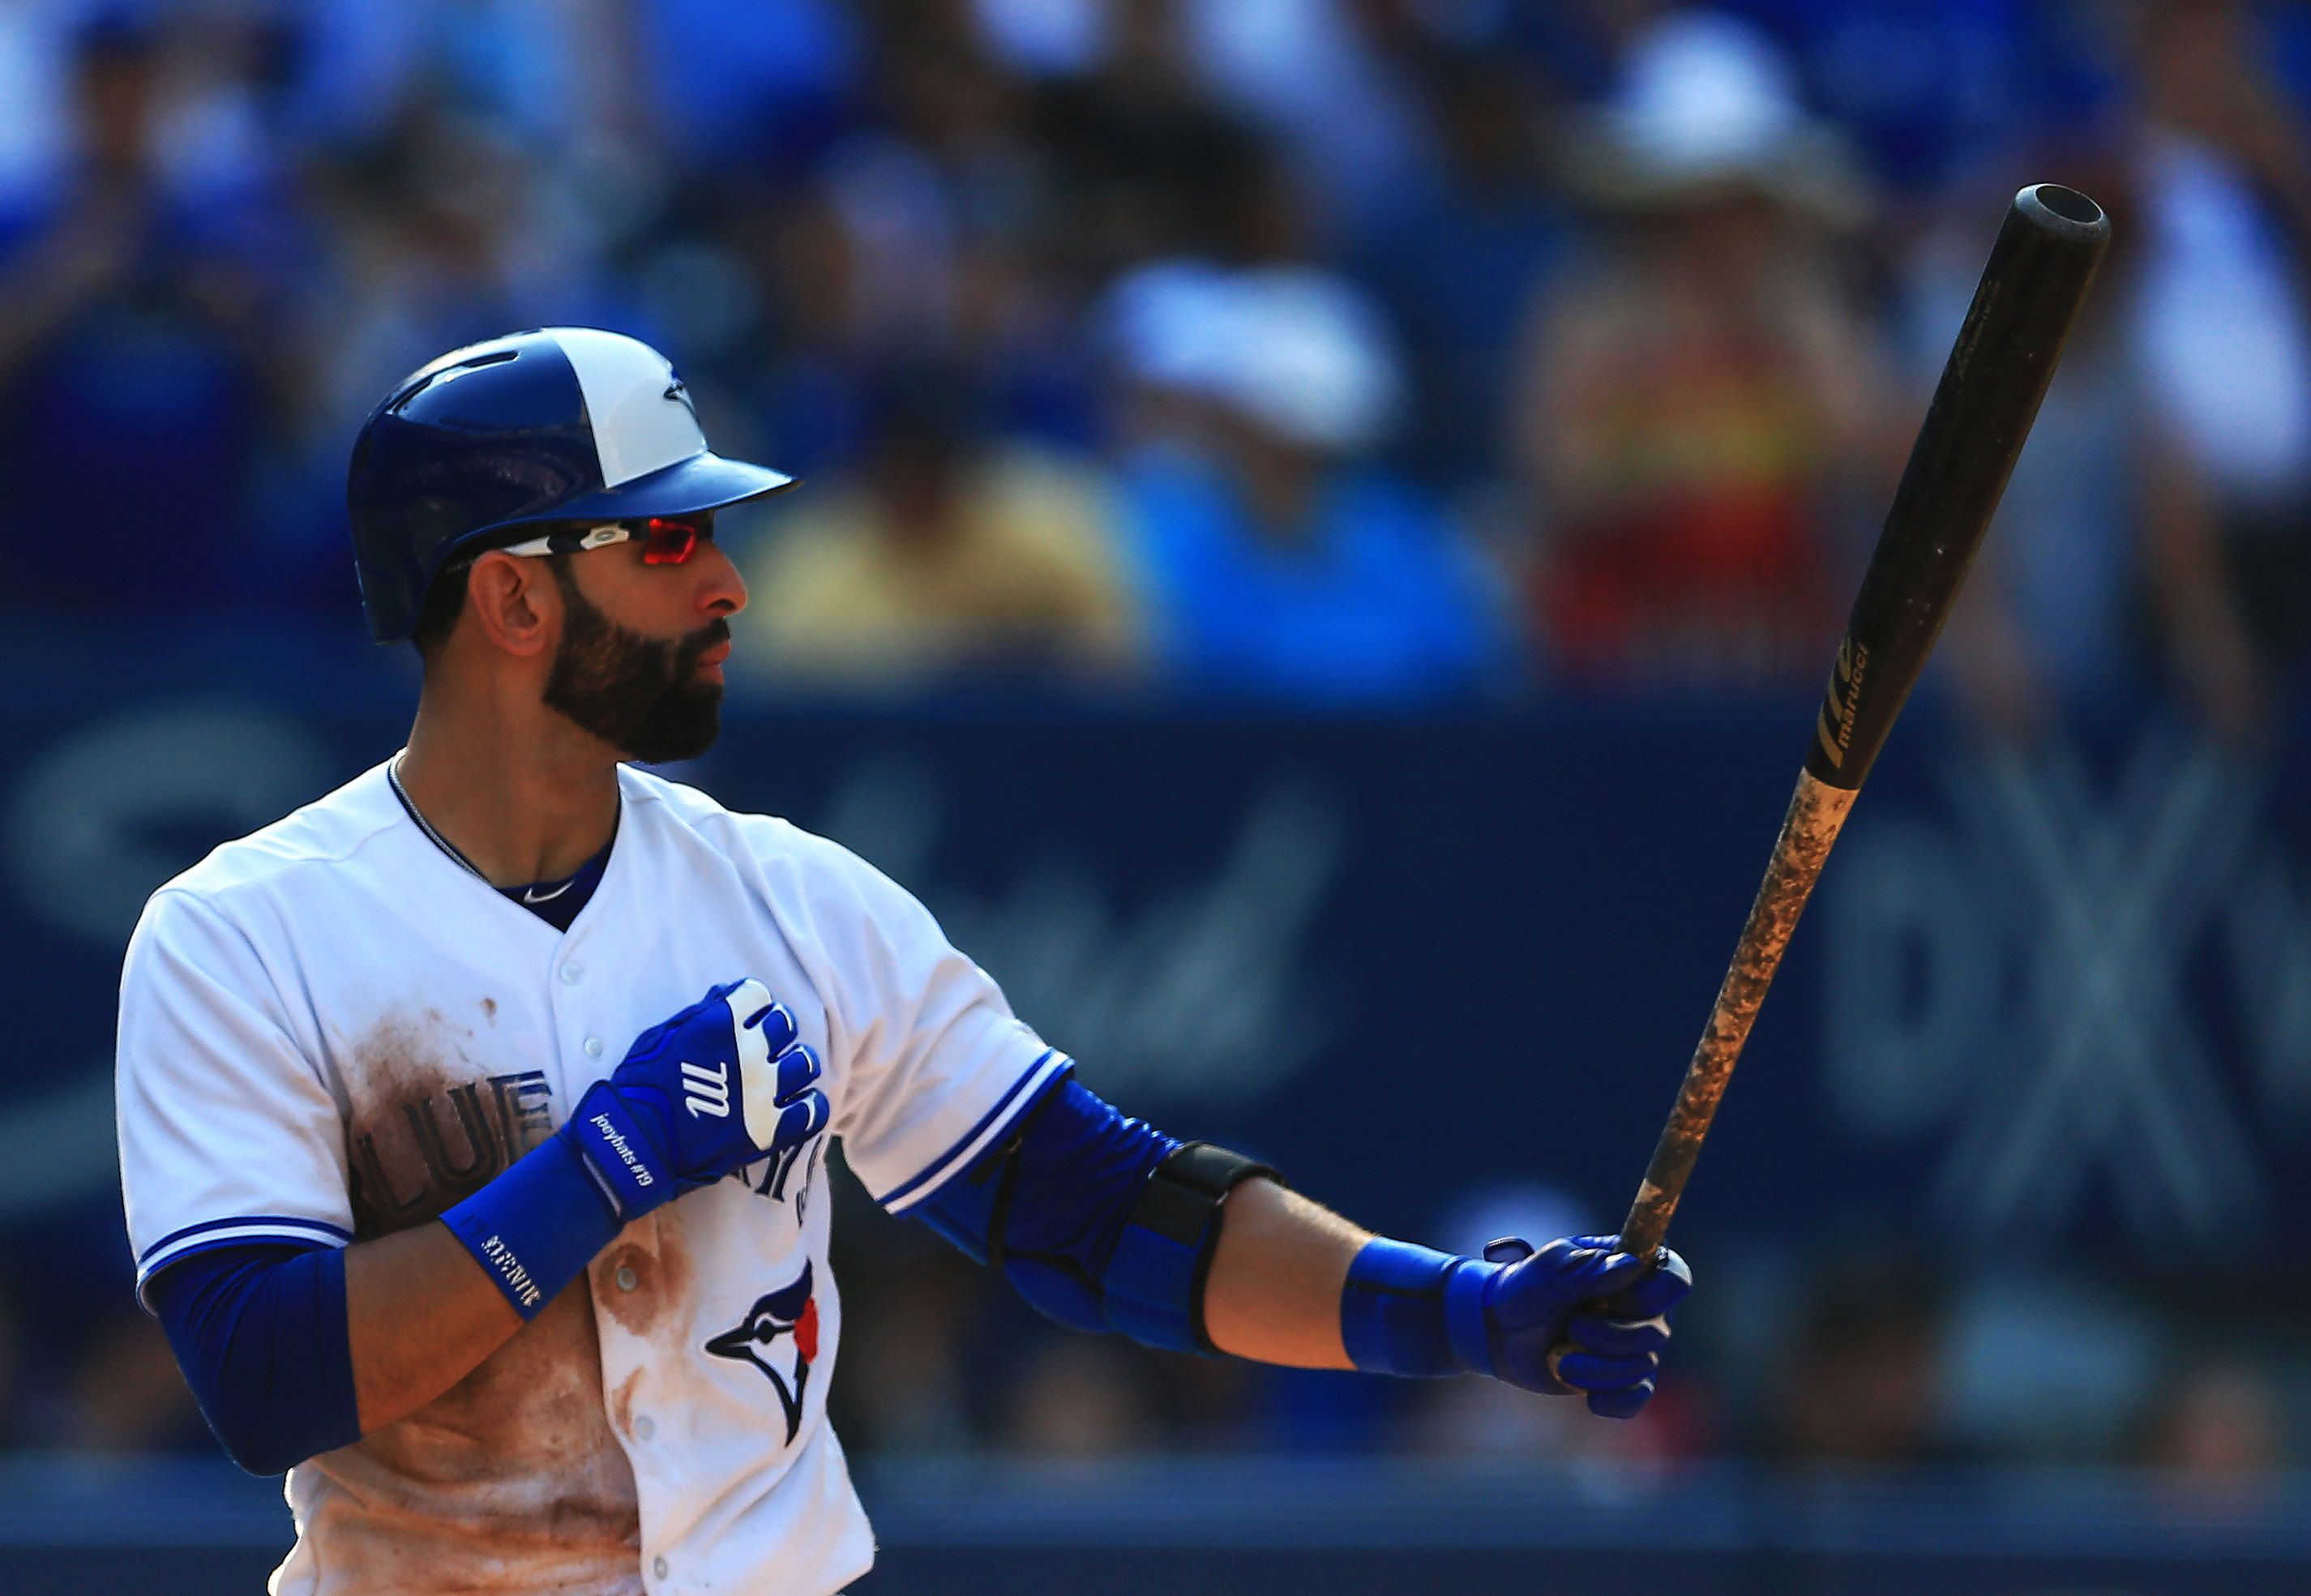 Toronto Blue Jays: The way forward looks unclear for Jose Bautista